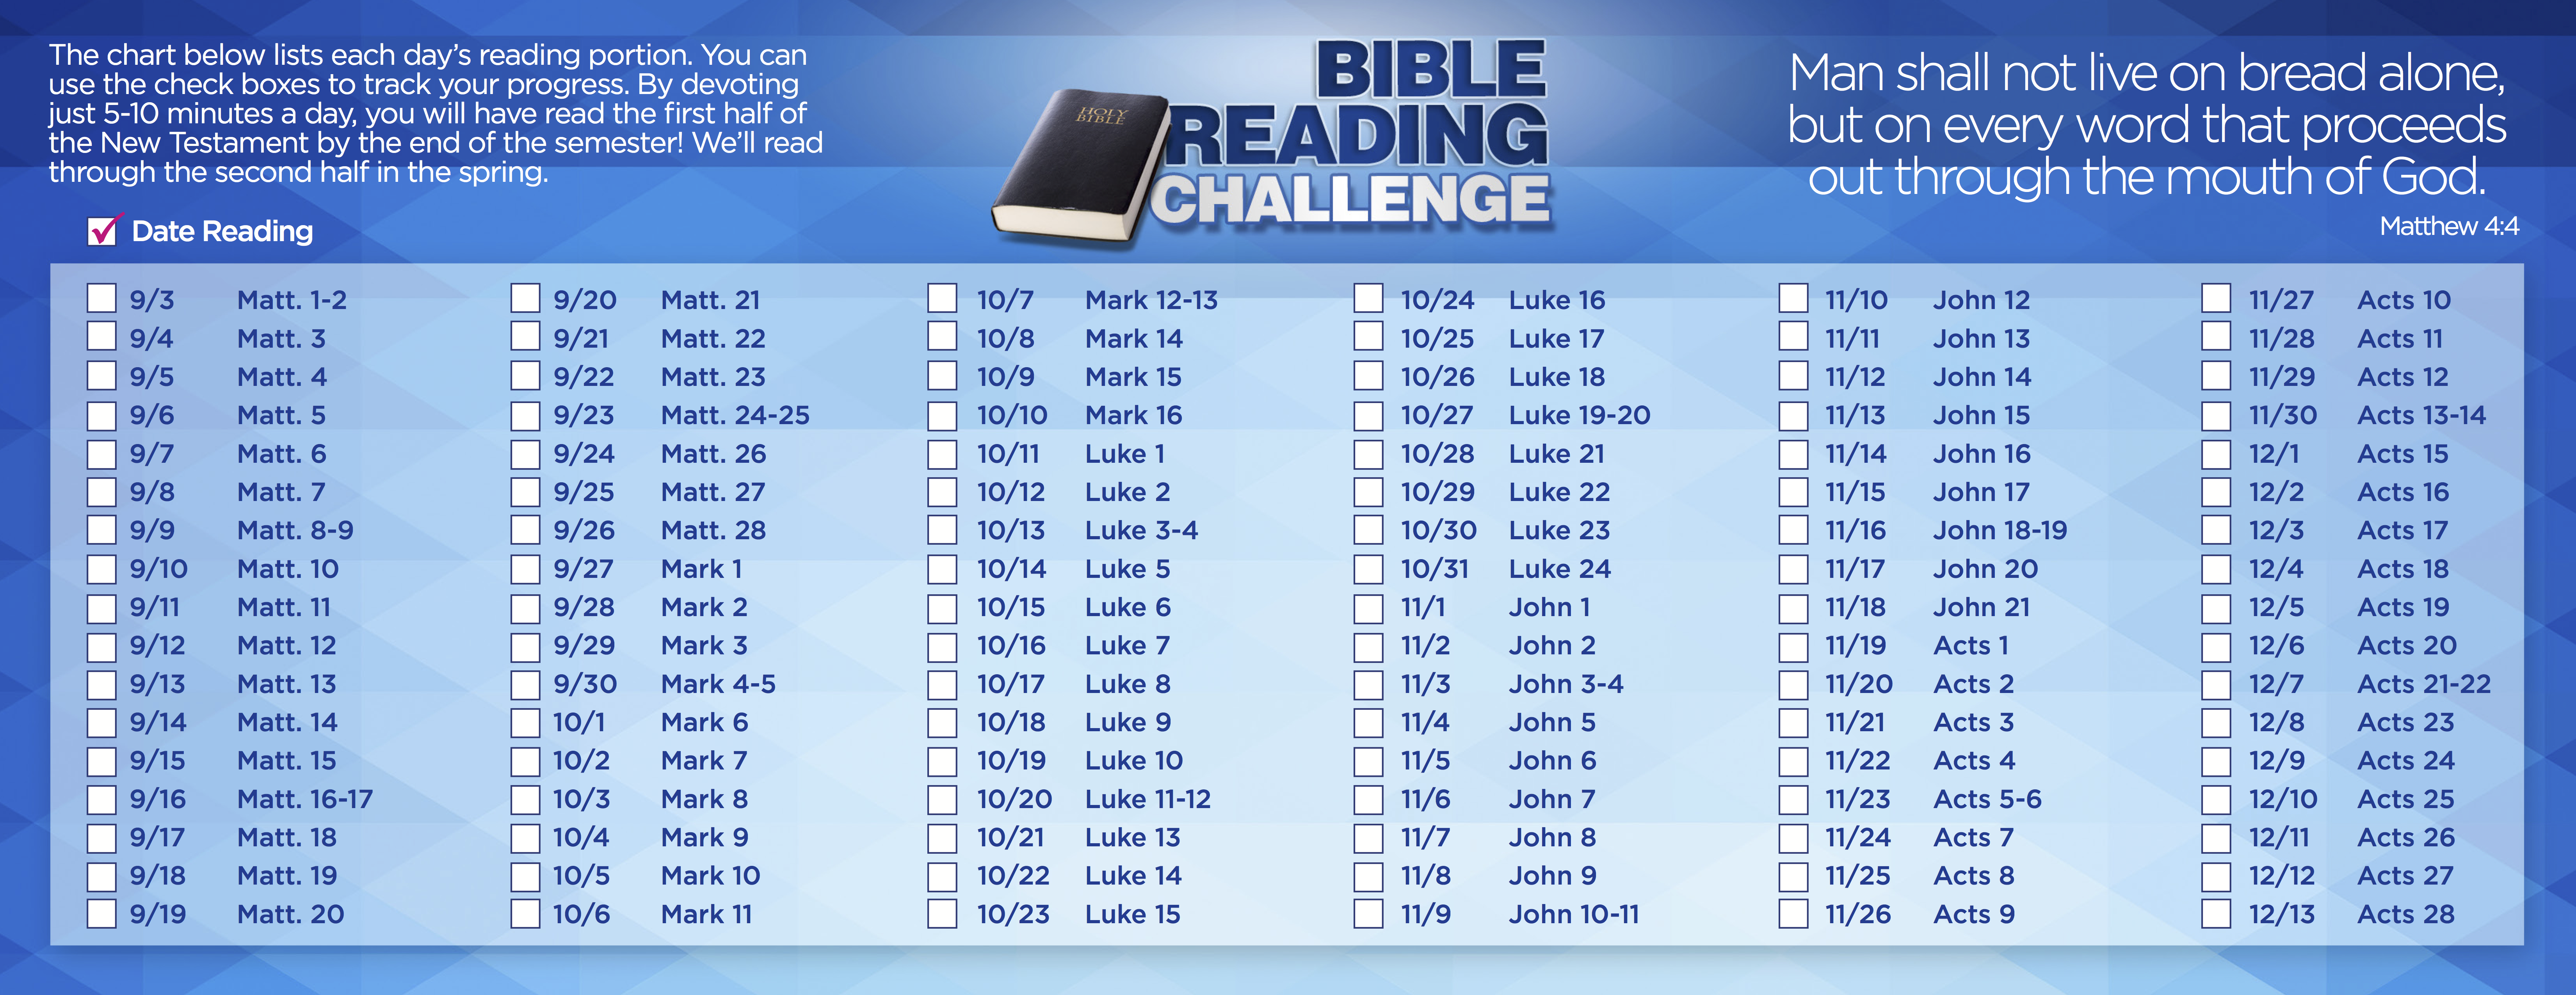 Daily Bread Bible Reading Chart